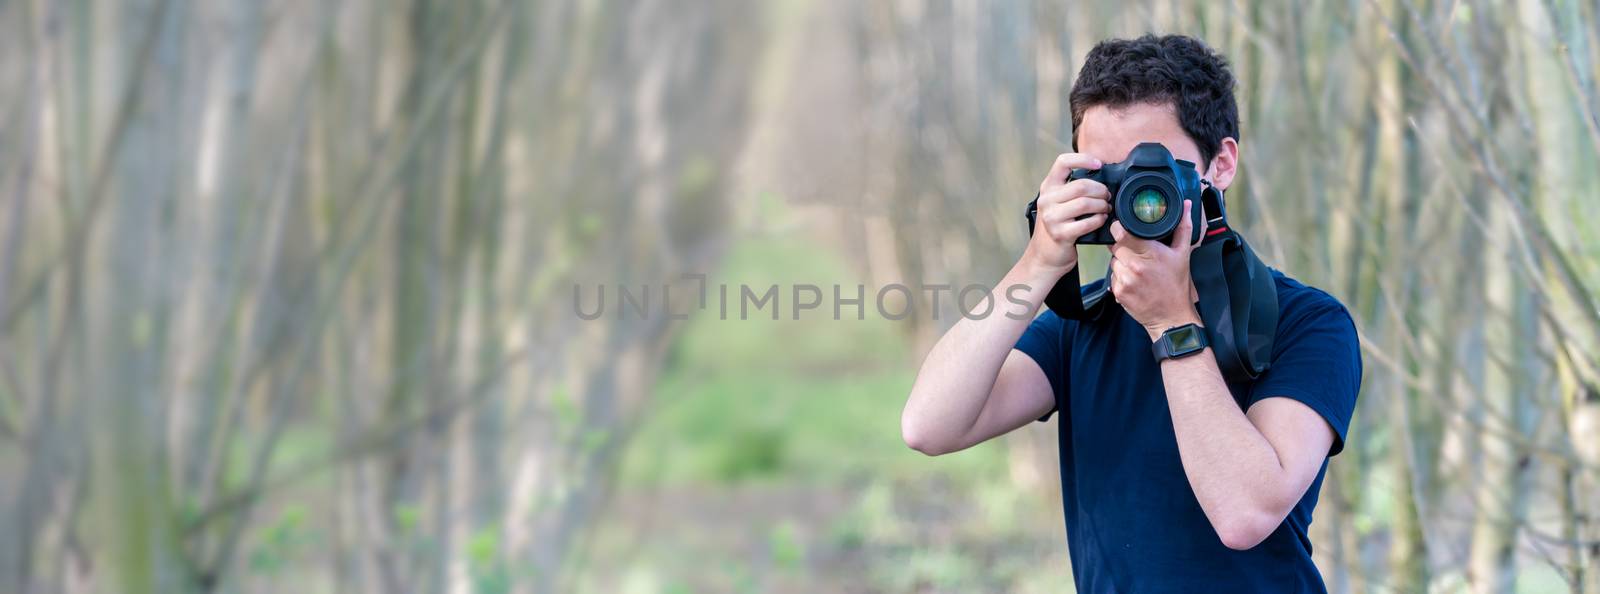 young man photographer in nature. copy space